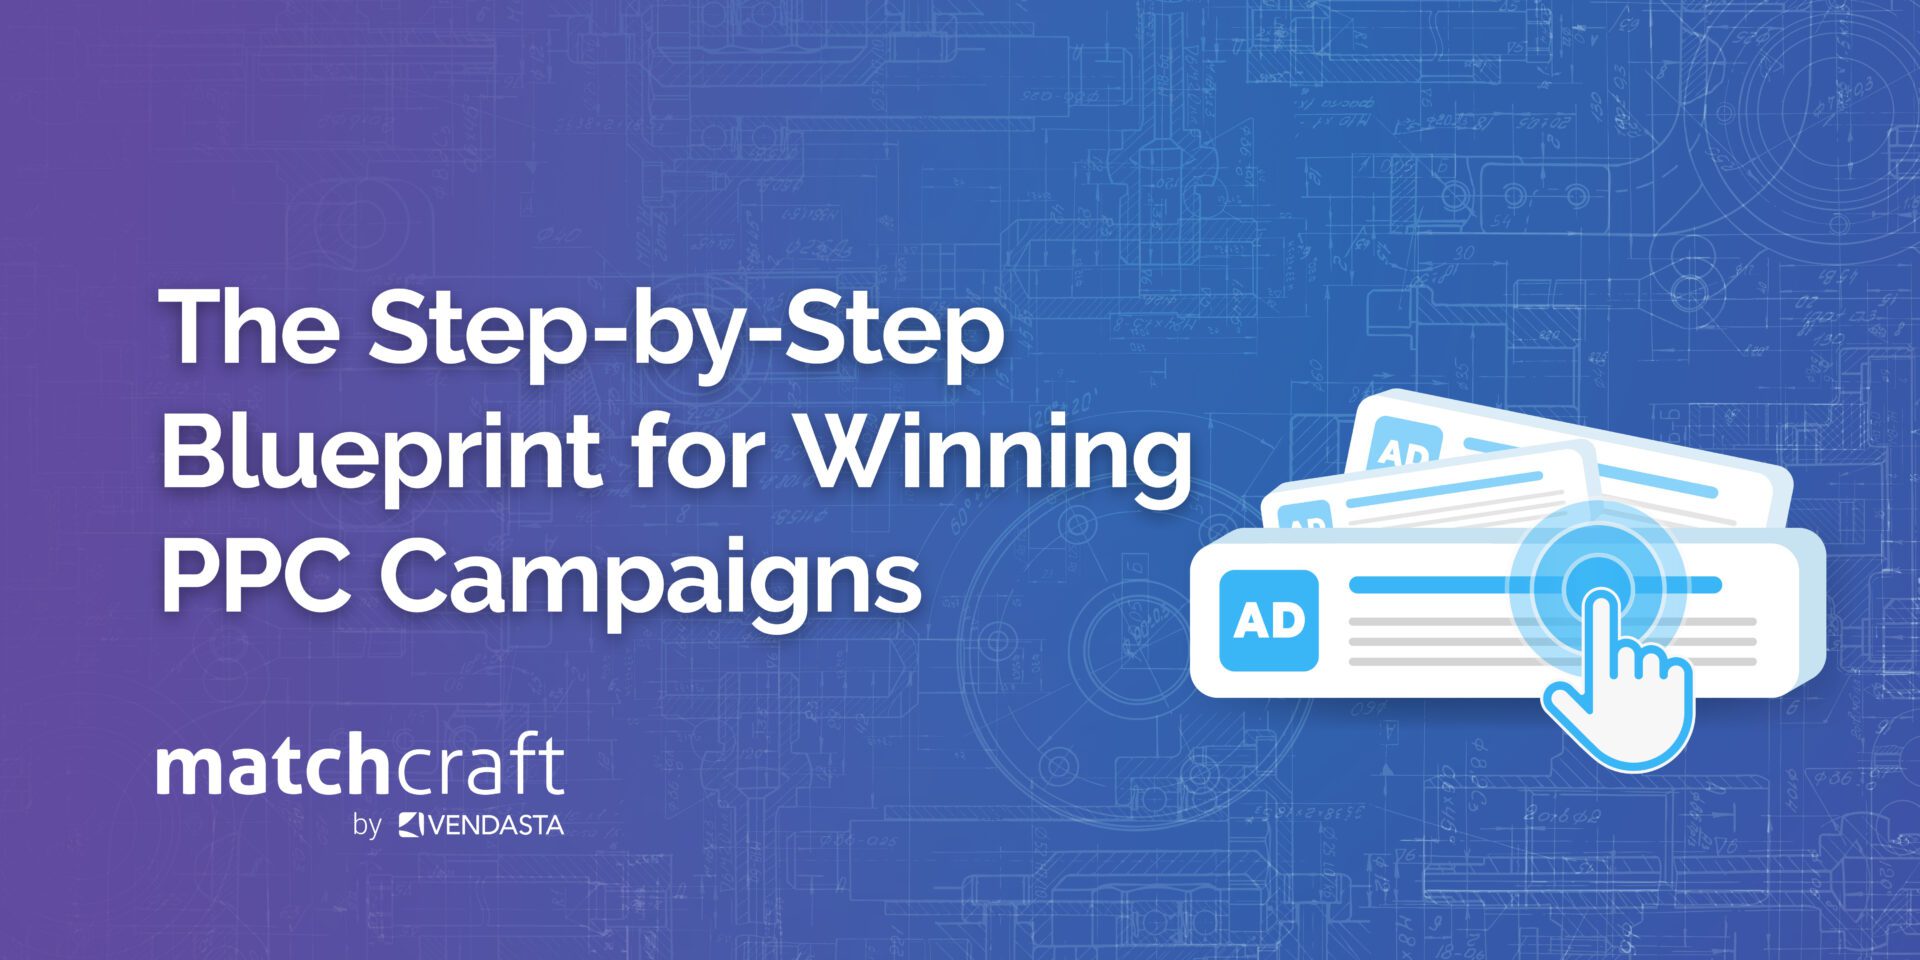 The Step-by-Step Blueprint for Winning PPC Campaigns